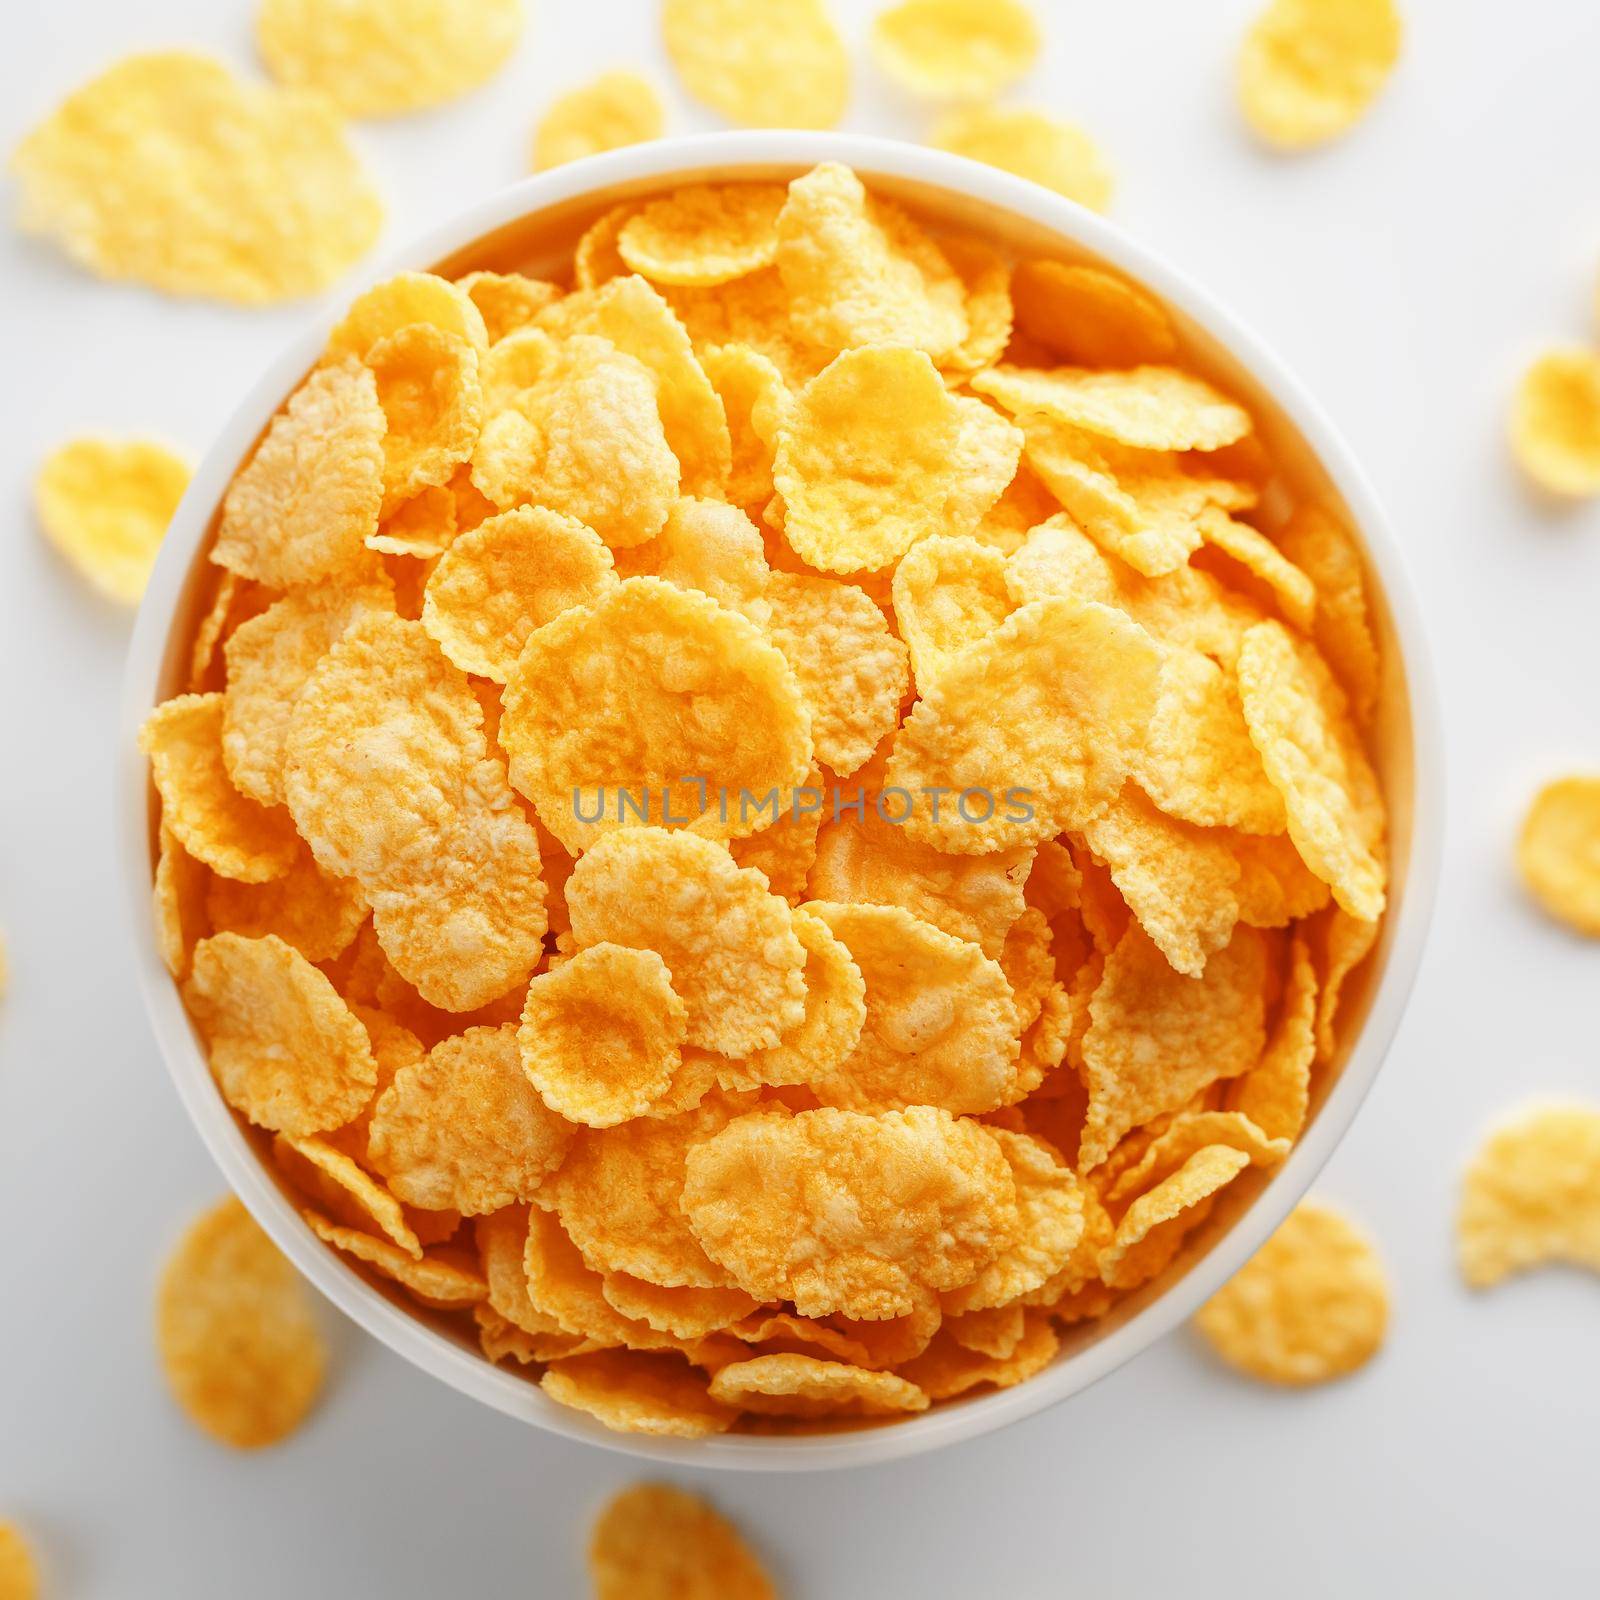 White cup with golden corn flakes, isolated on white background. Hopya crumbled around the cup. View from above. Delicious and healthy breakfast